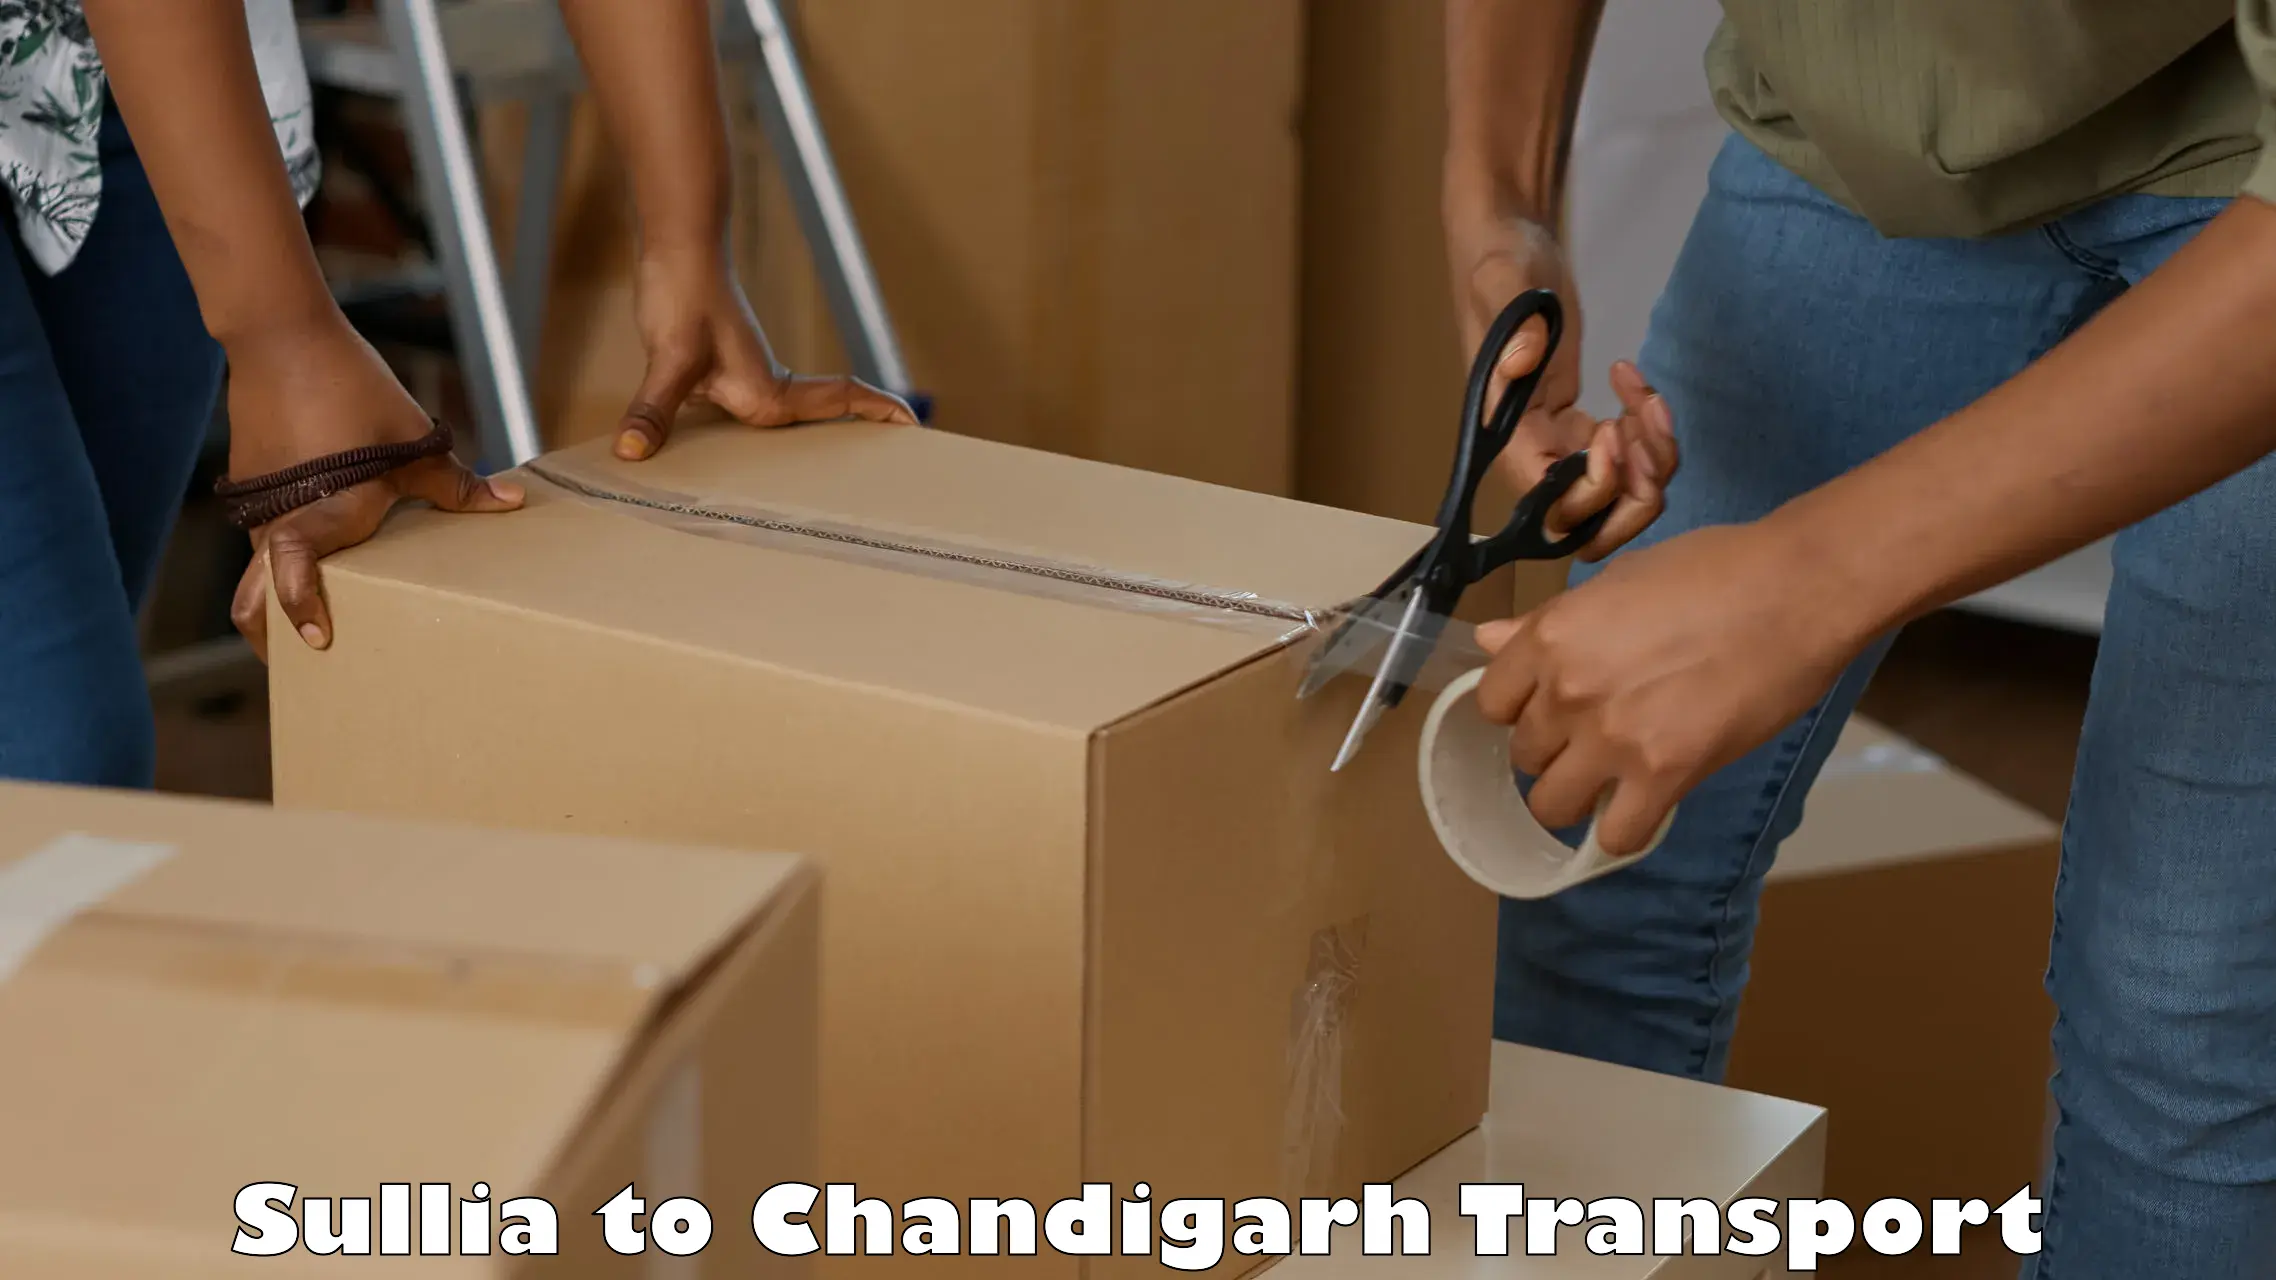 Commercial transport service Sullia to Chandigarh